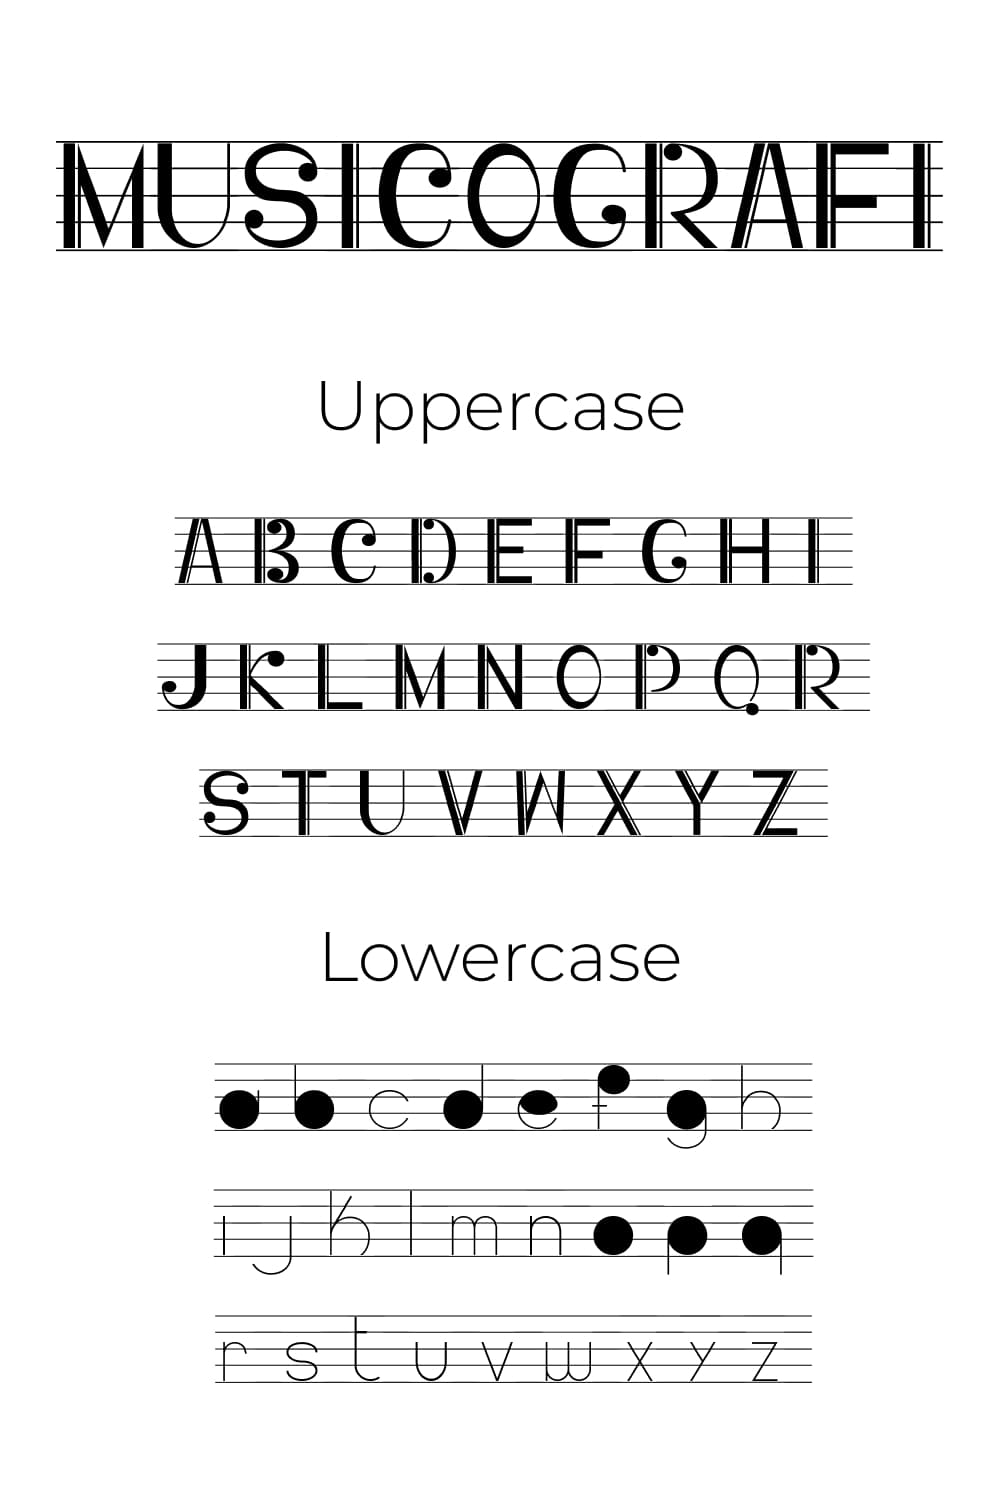 Uppercase and Lowercase Preview Pinterest Collage Image Musicografi free music font by MasterBundles.